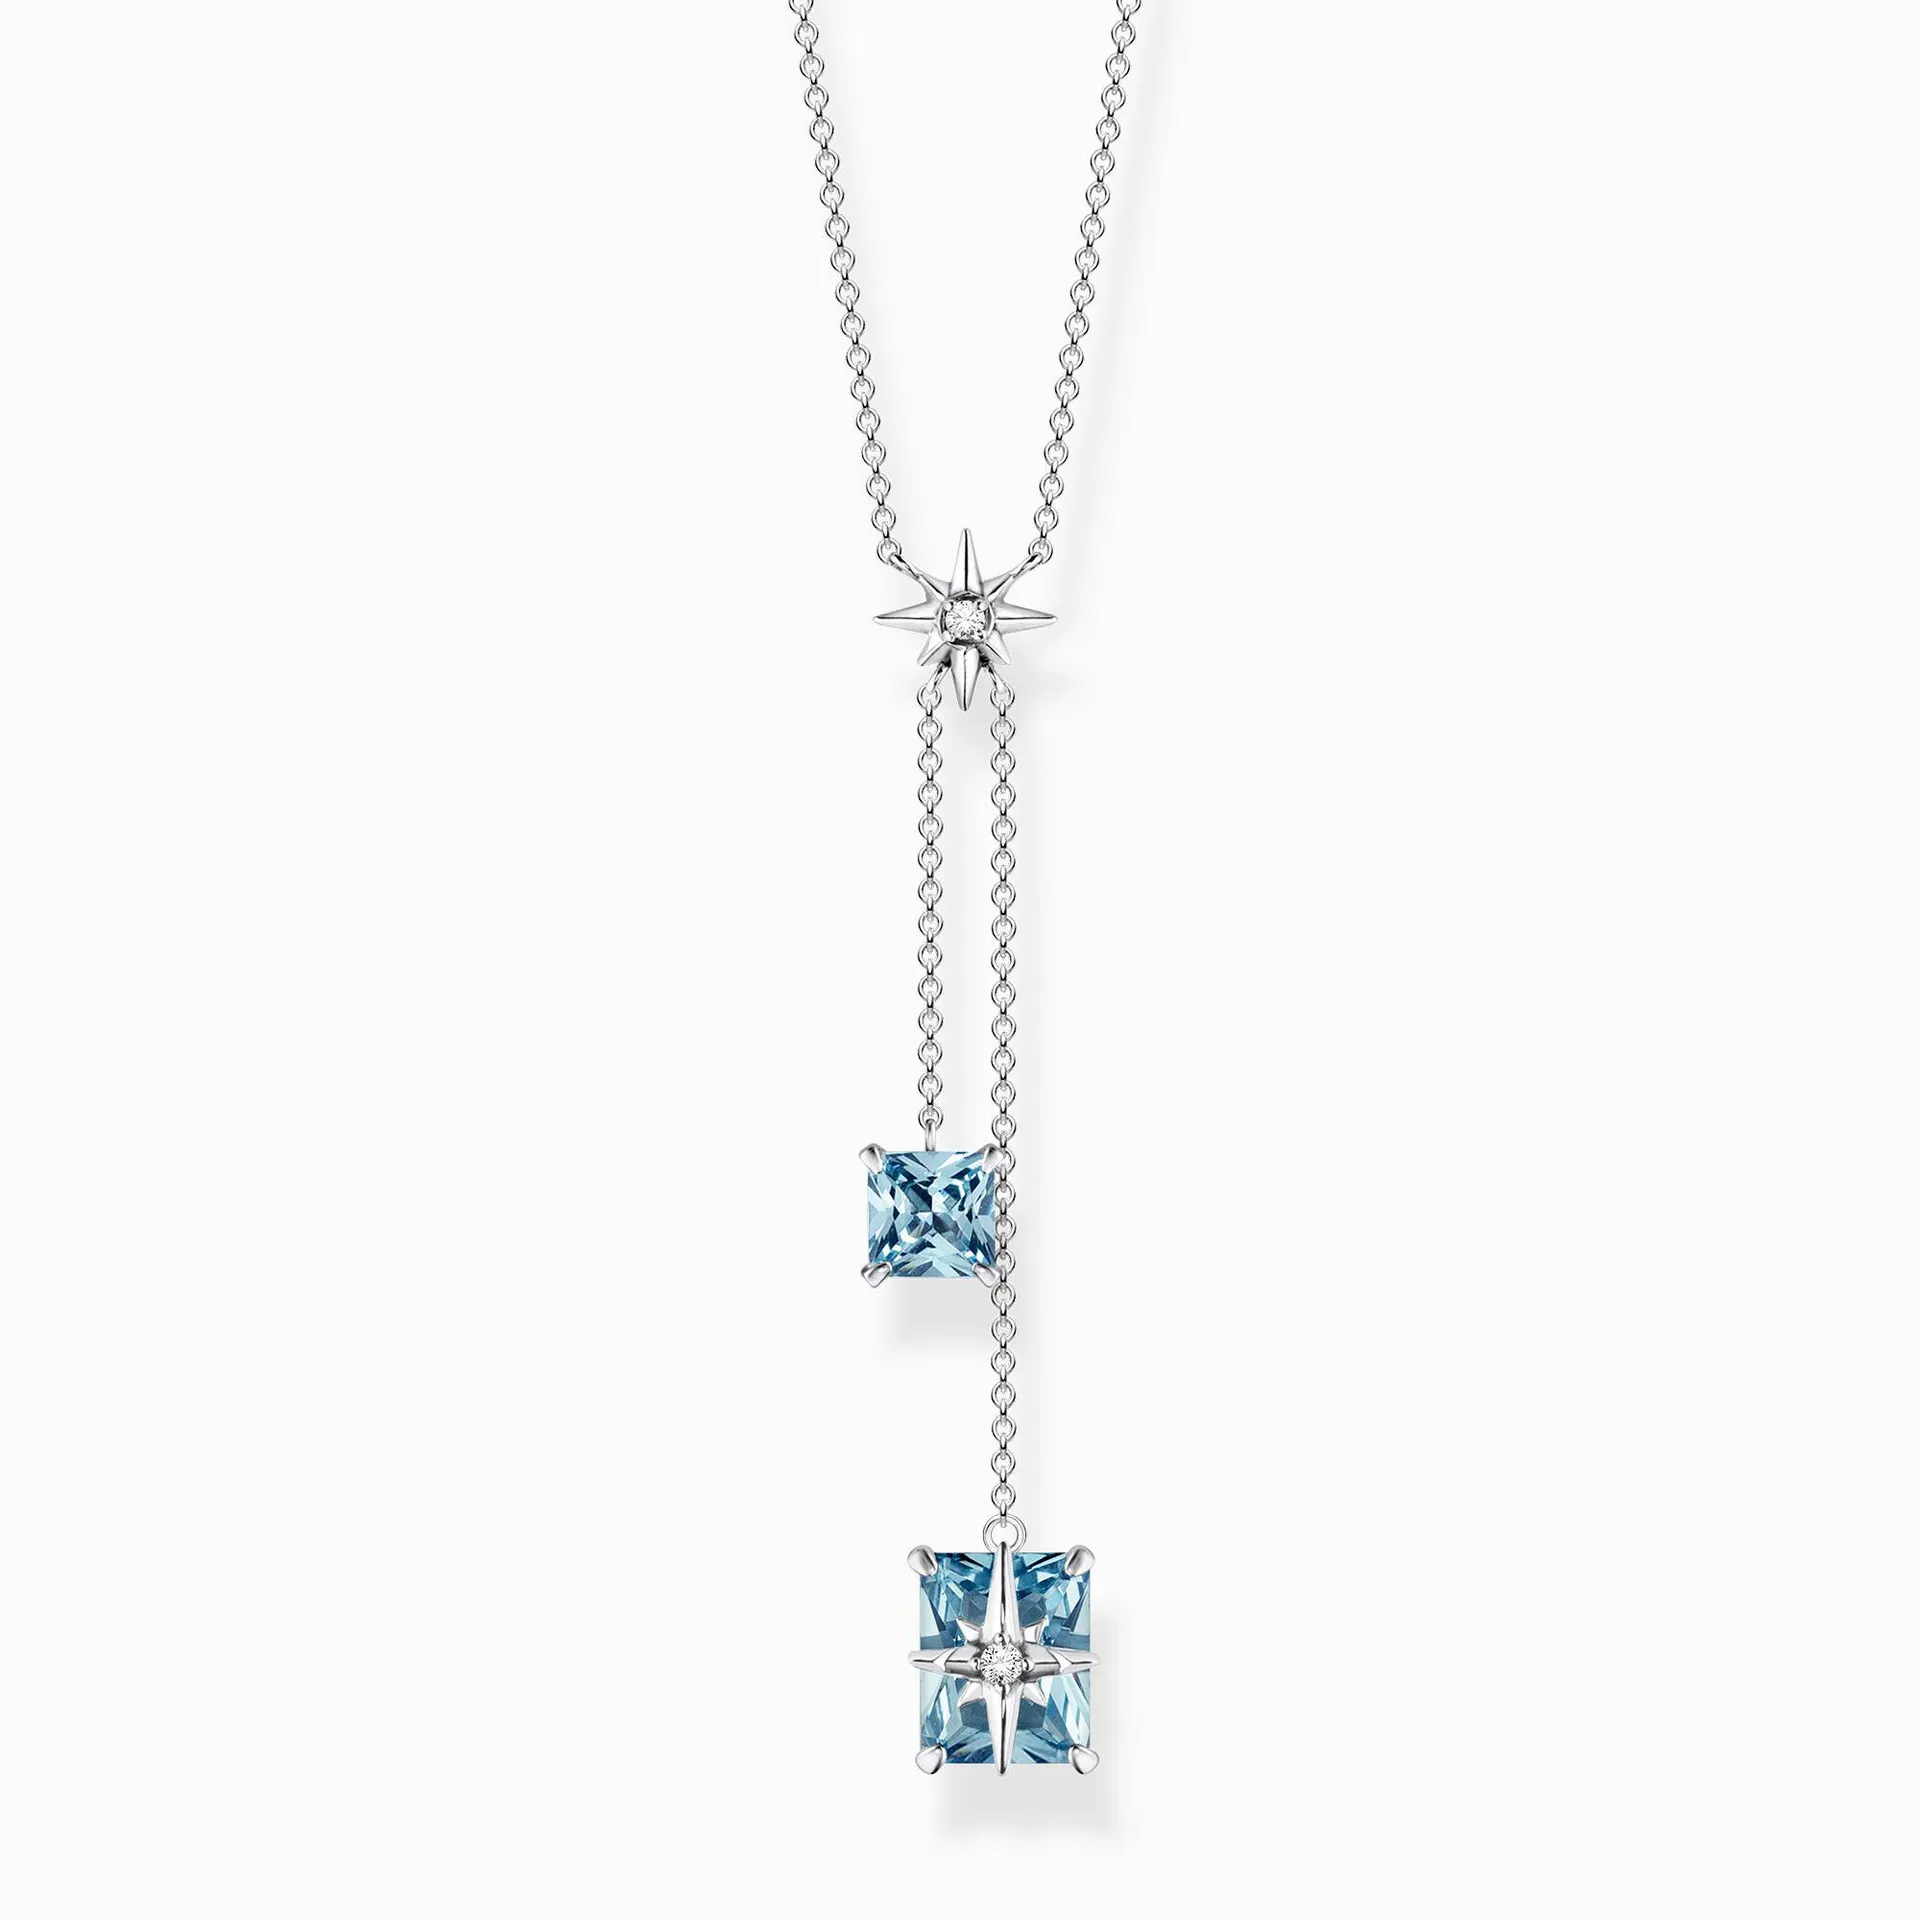 Necklace with aquamarine-coloured stones and stars silver